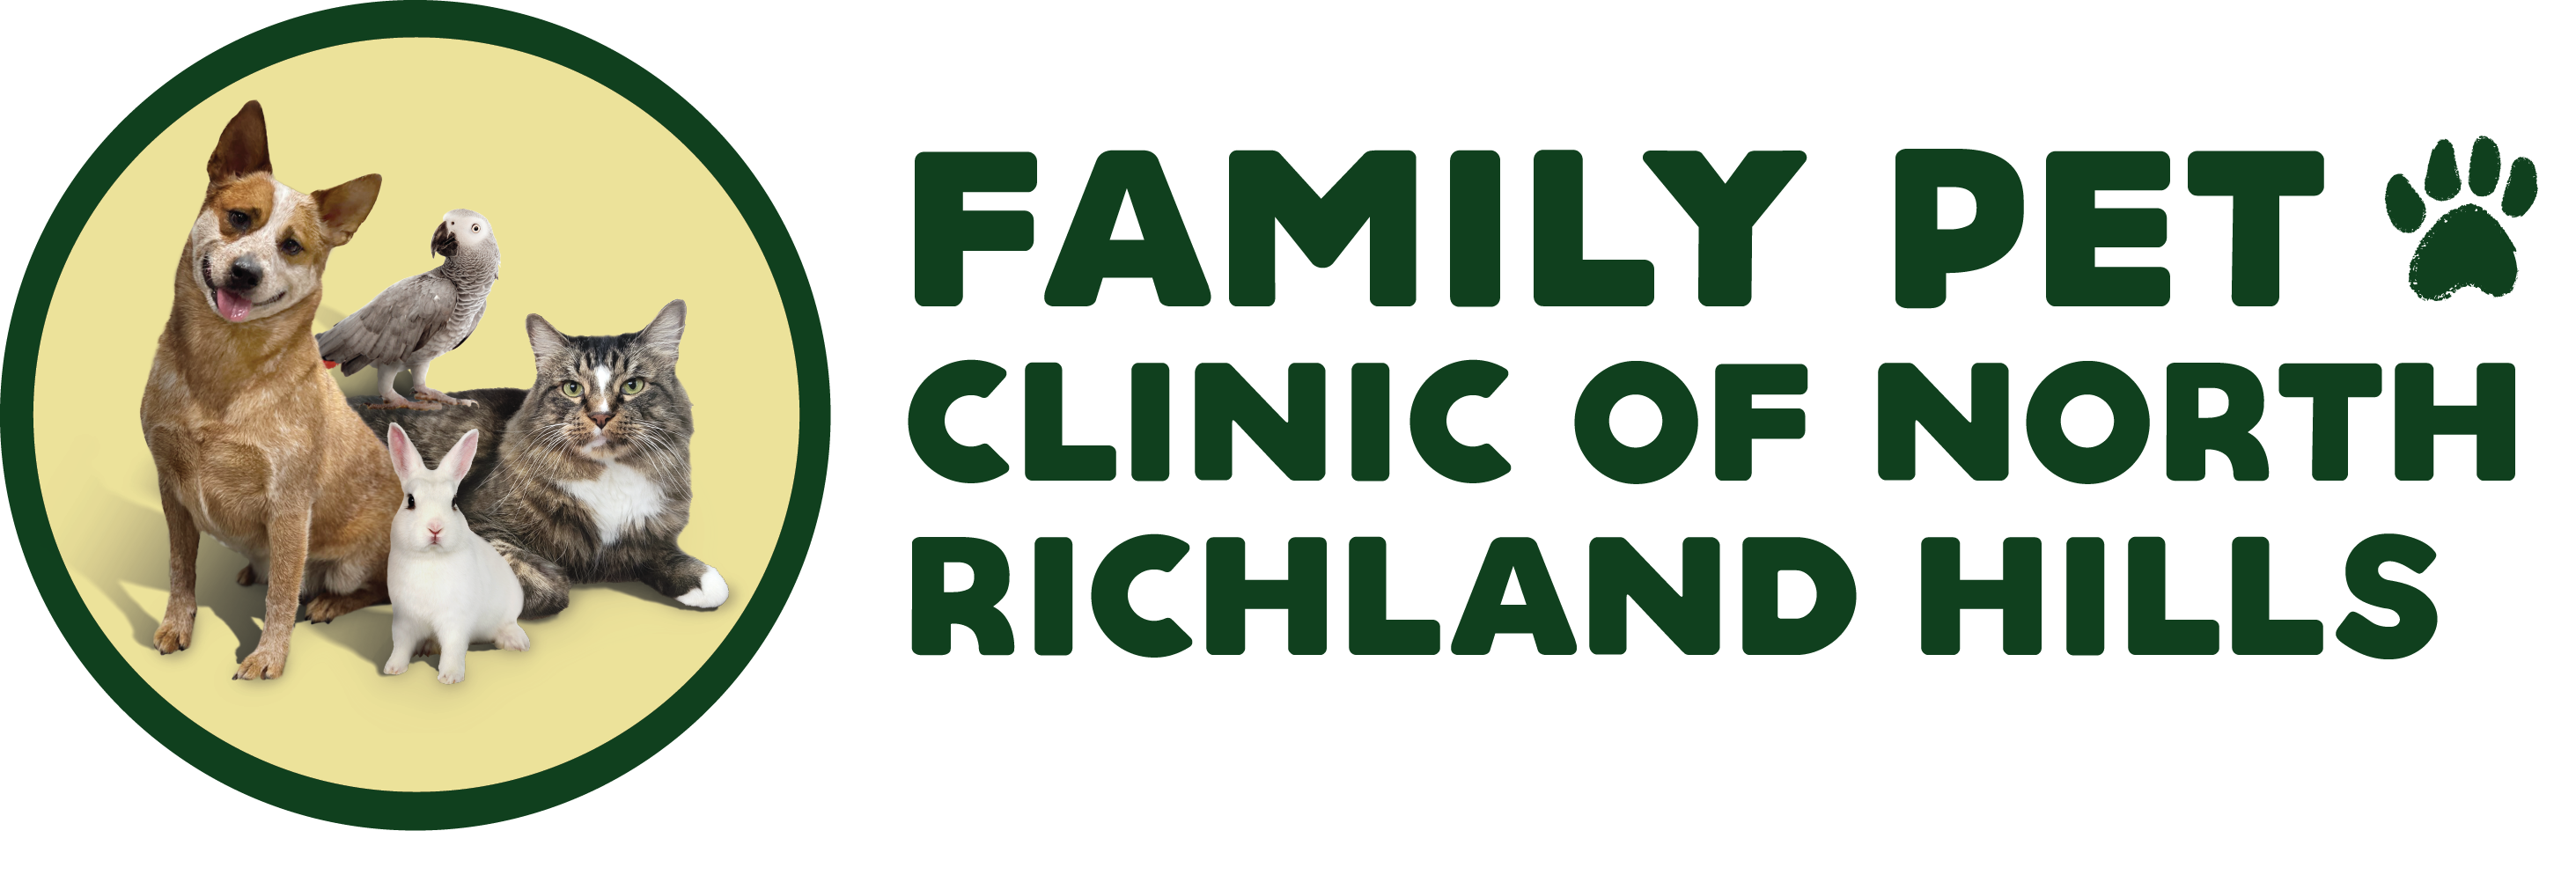 Homepage | Family Pet Clinic of North Richland Hills